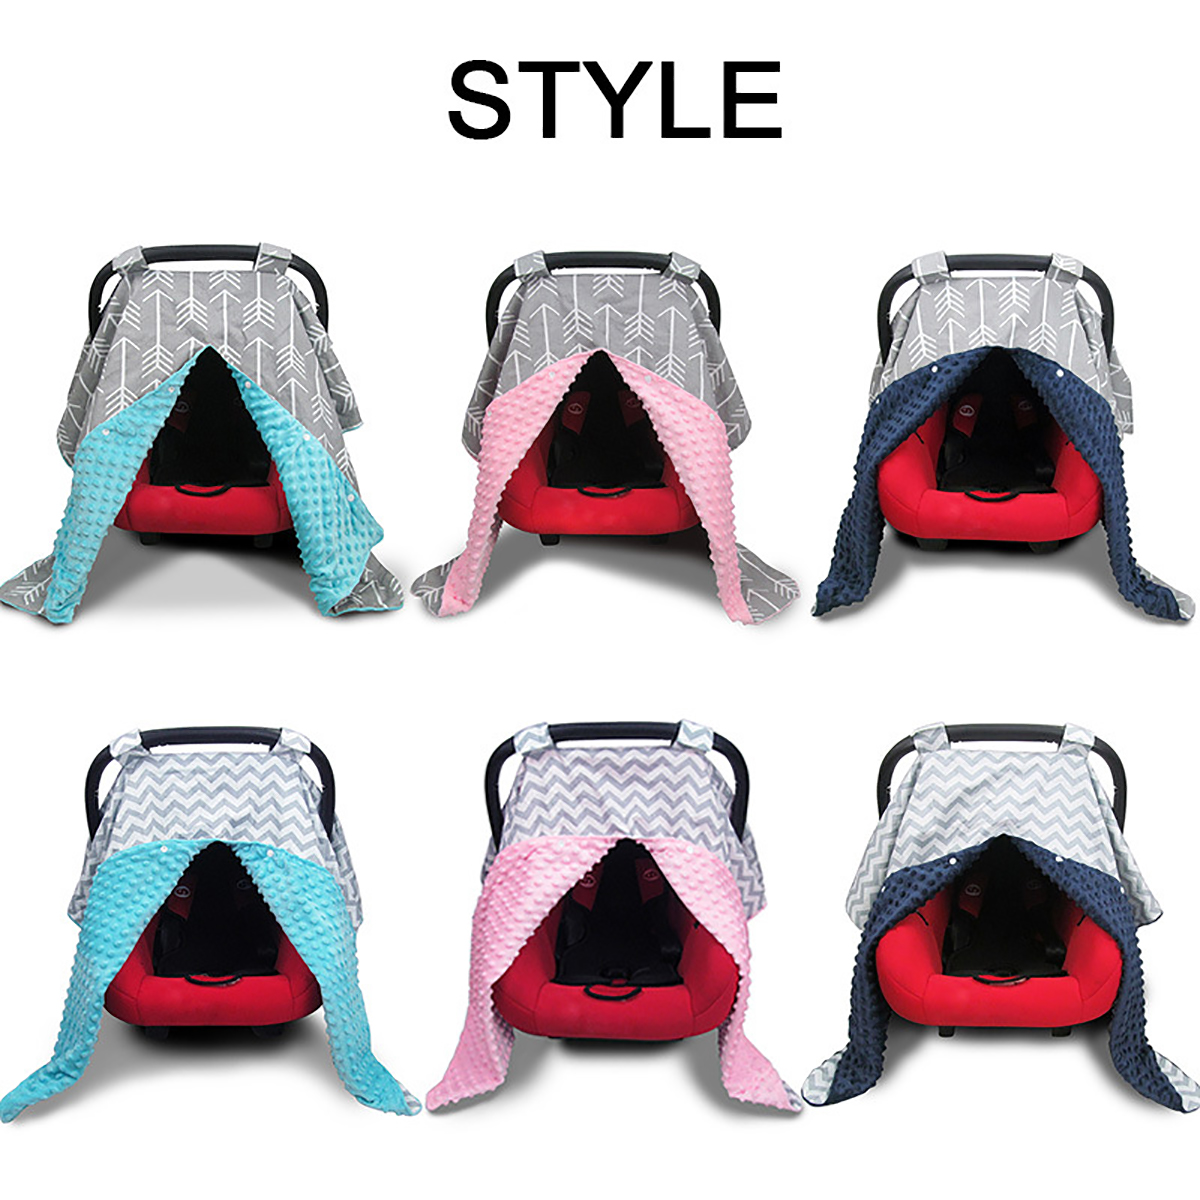 4-IN-1-Thickened-Multi-Use-Stroller-Cart-Seat-Cover-Breastfeeding-Nursing-Scarf-Snug-Warm-Breathable-1810349-2